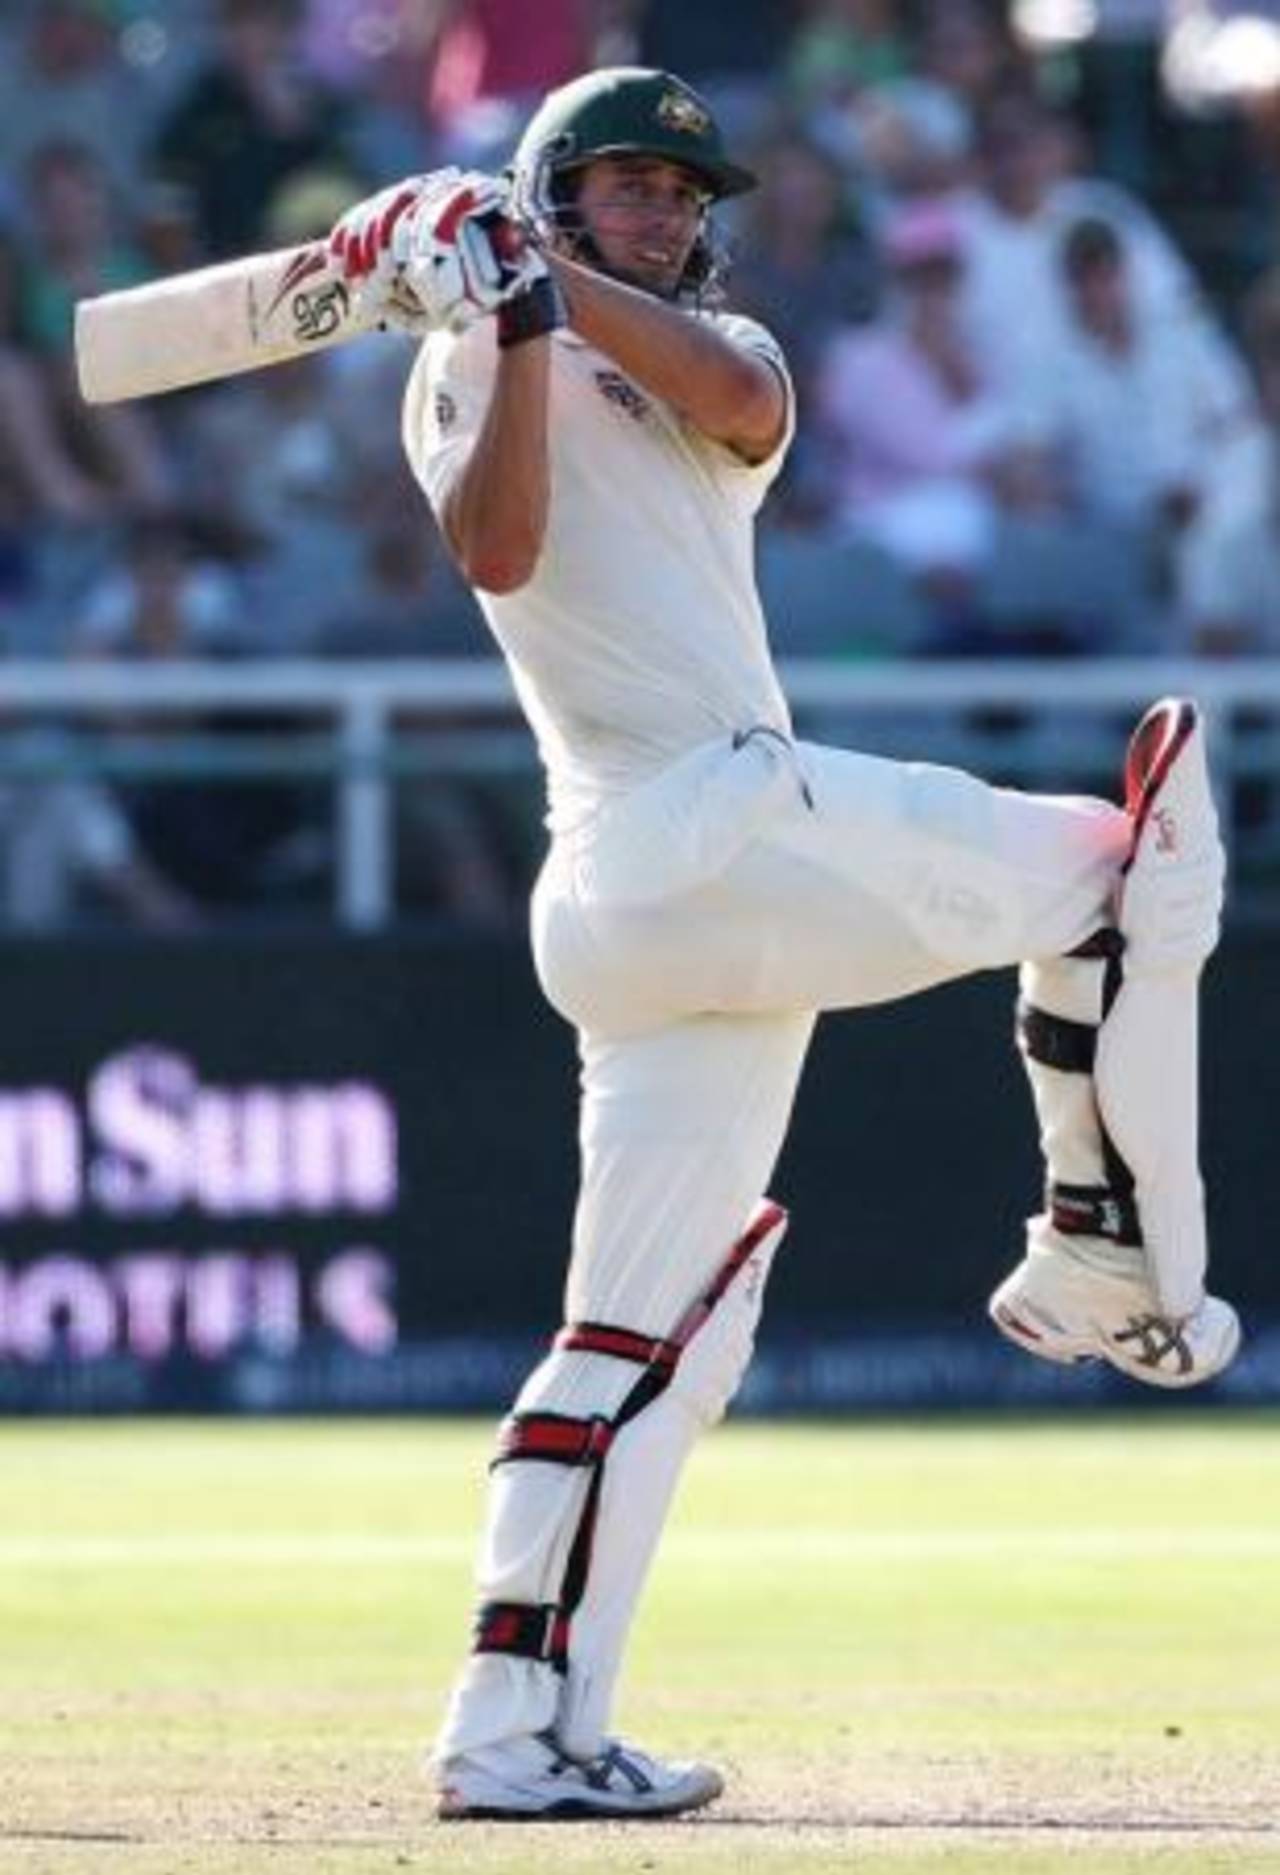 An imperious pull from Mitchell Johnson, South Africa v Australia, 3rd Test, 4th day, Cape Town, March 22, 2009